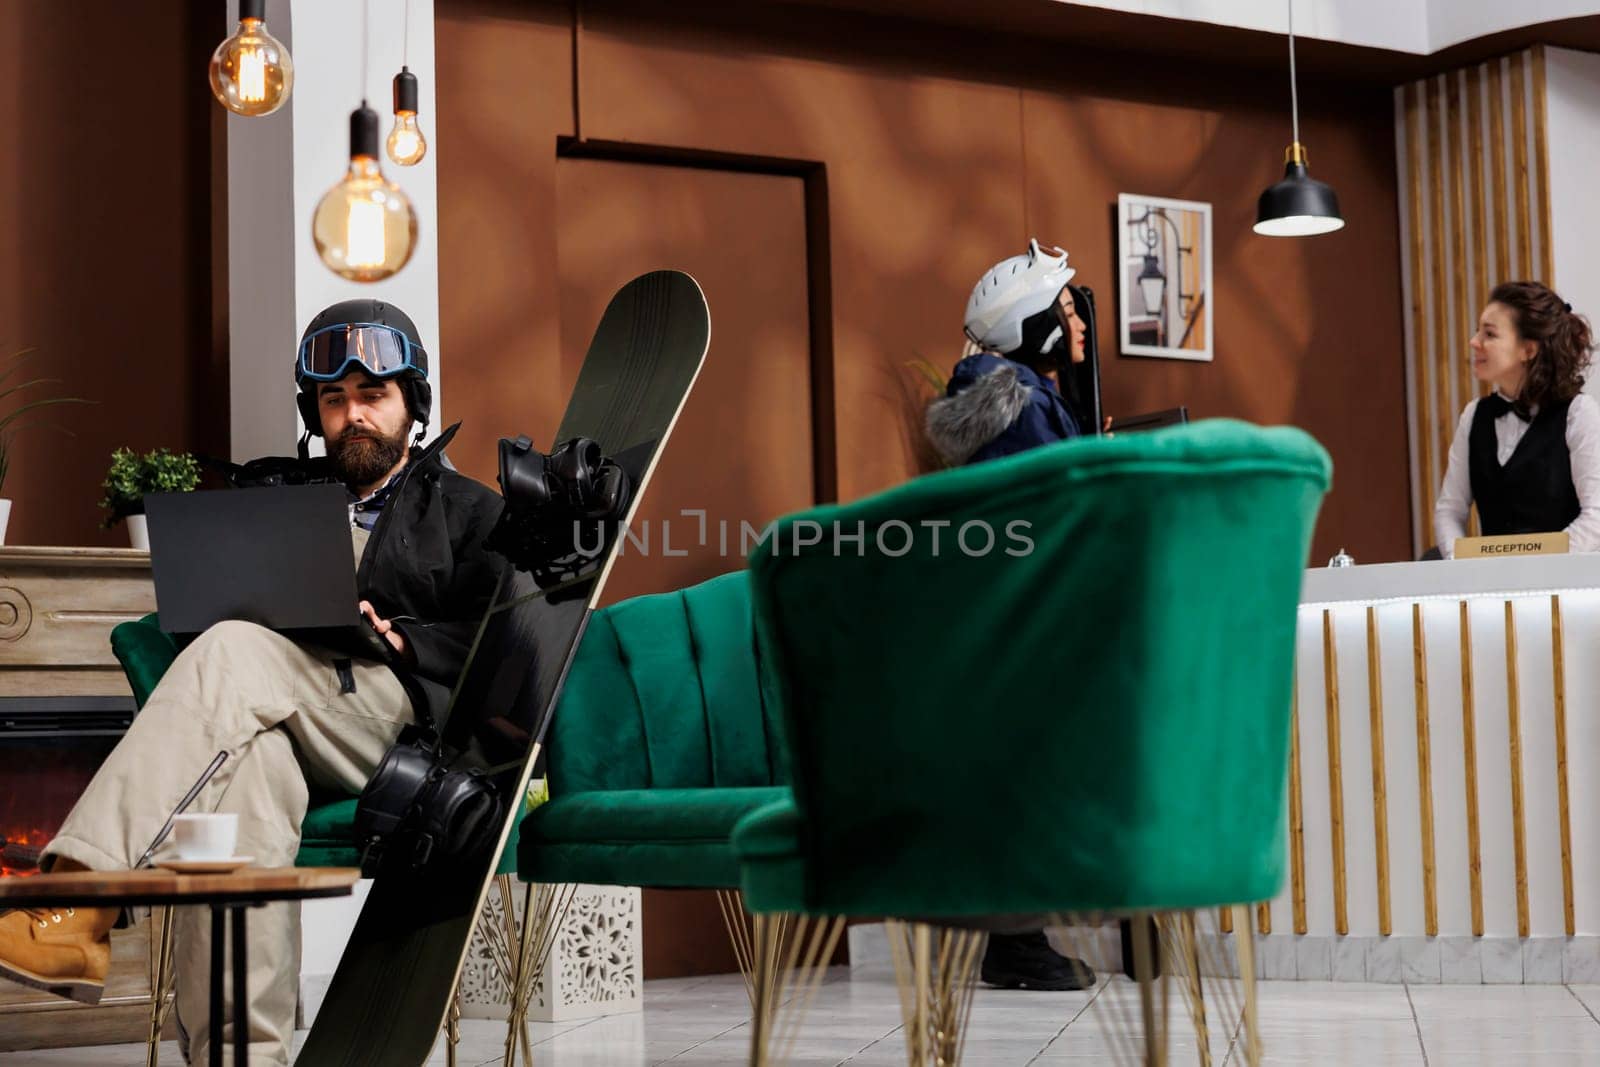 Caucasian man wearing winter clothing sitting on hotel lobby sofa and using laptop for booking. Staff assists guest in the background. Snowboard and ski goggles suggests ski resort holiday.